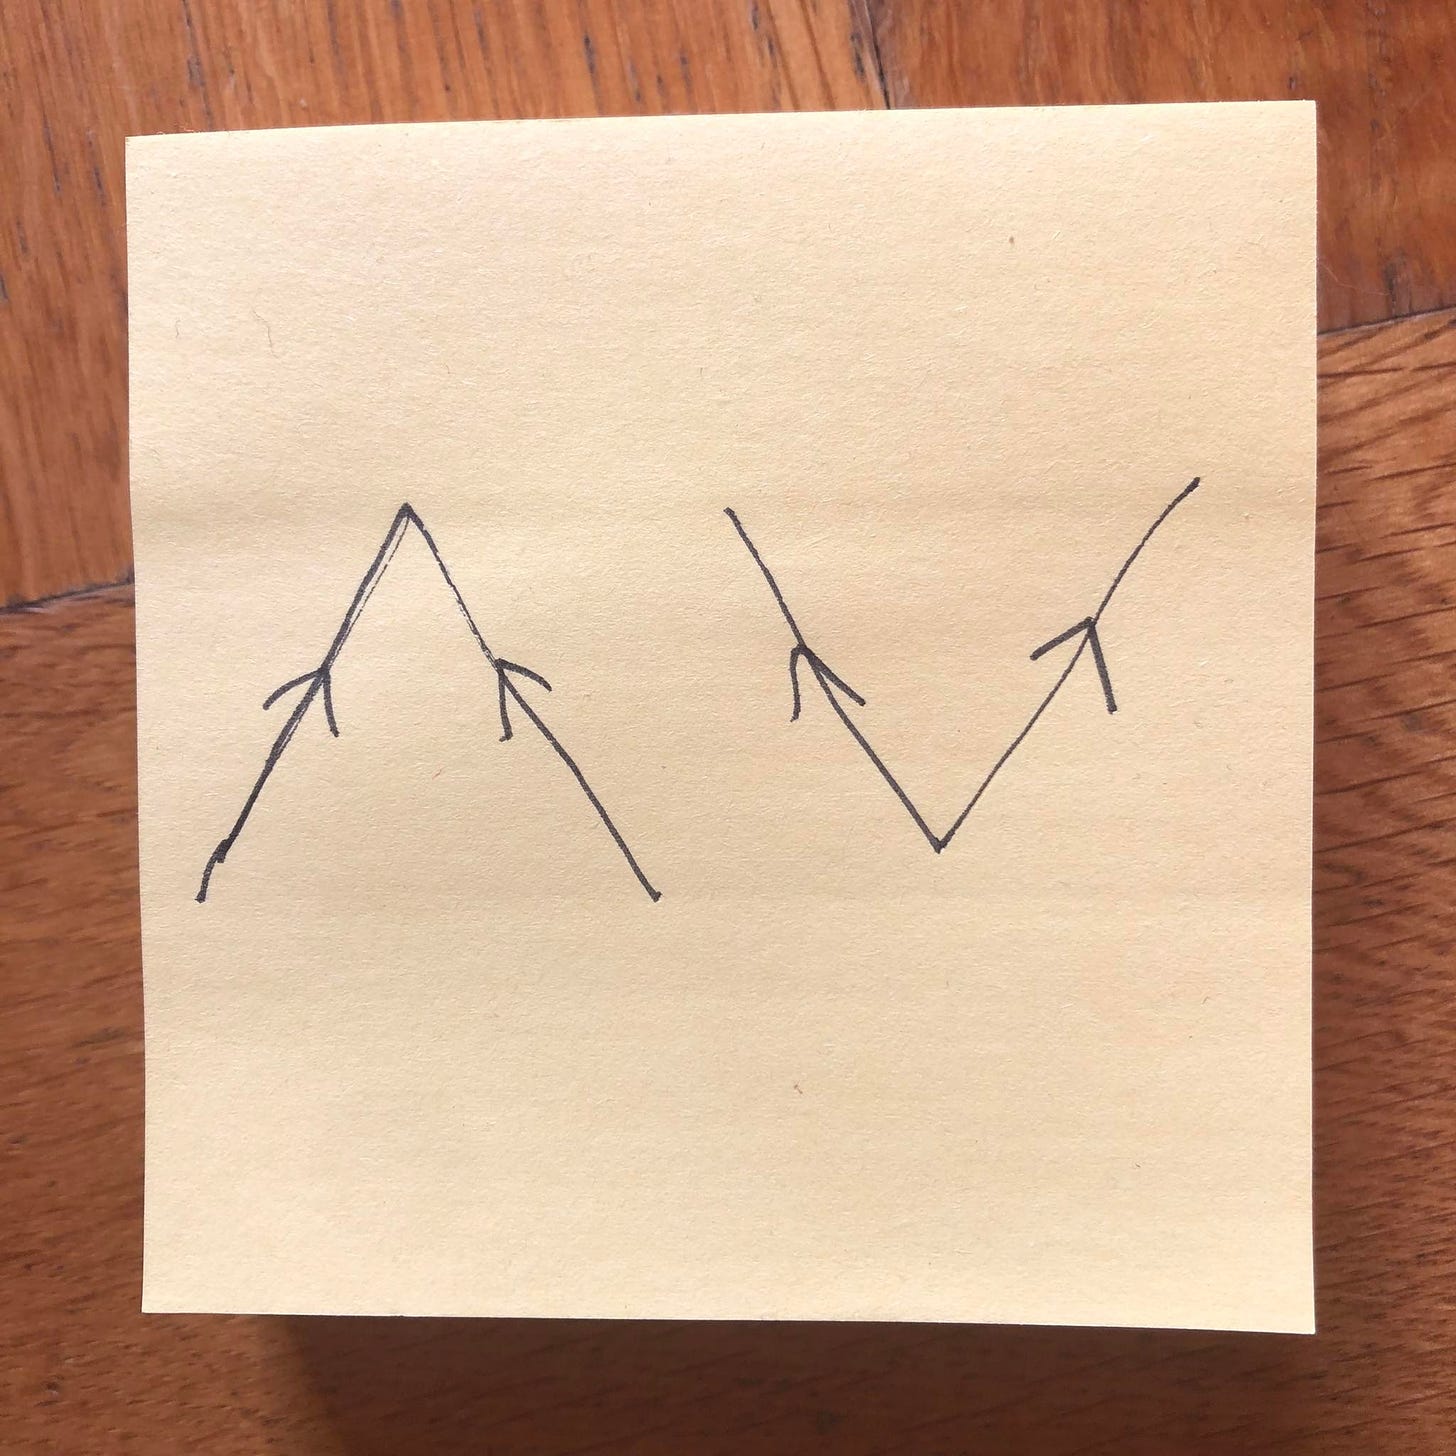 Post-it note drawing of two arrow shapes, one where the arrows converge to a point and one where the arrows depart in different ever-expanding directions